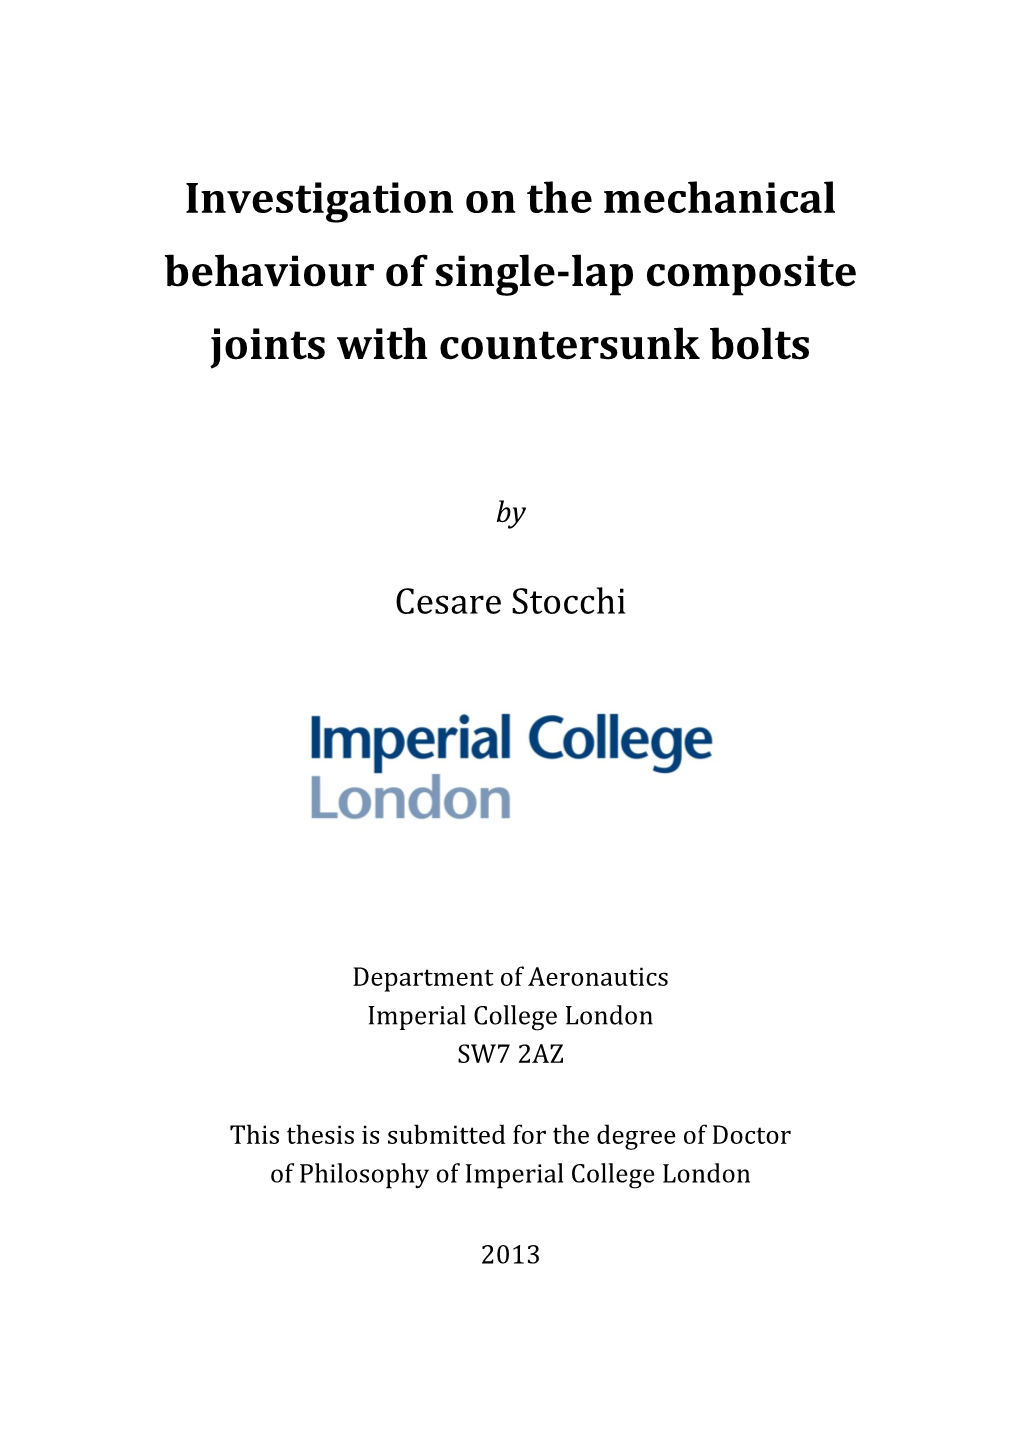 Investigation on the Mechanical Behaviour of Single-Lap Composite Joints with Countersunk Bolts